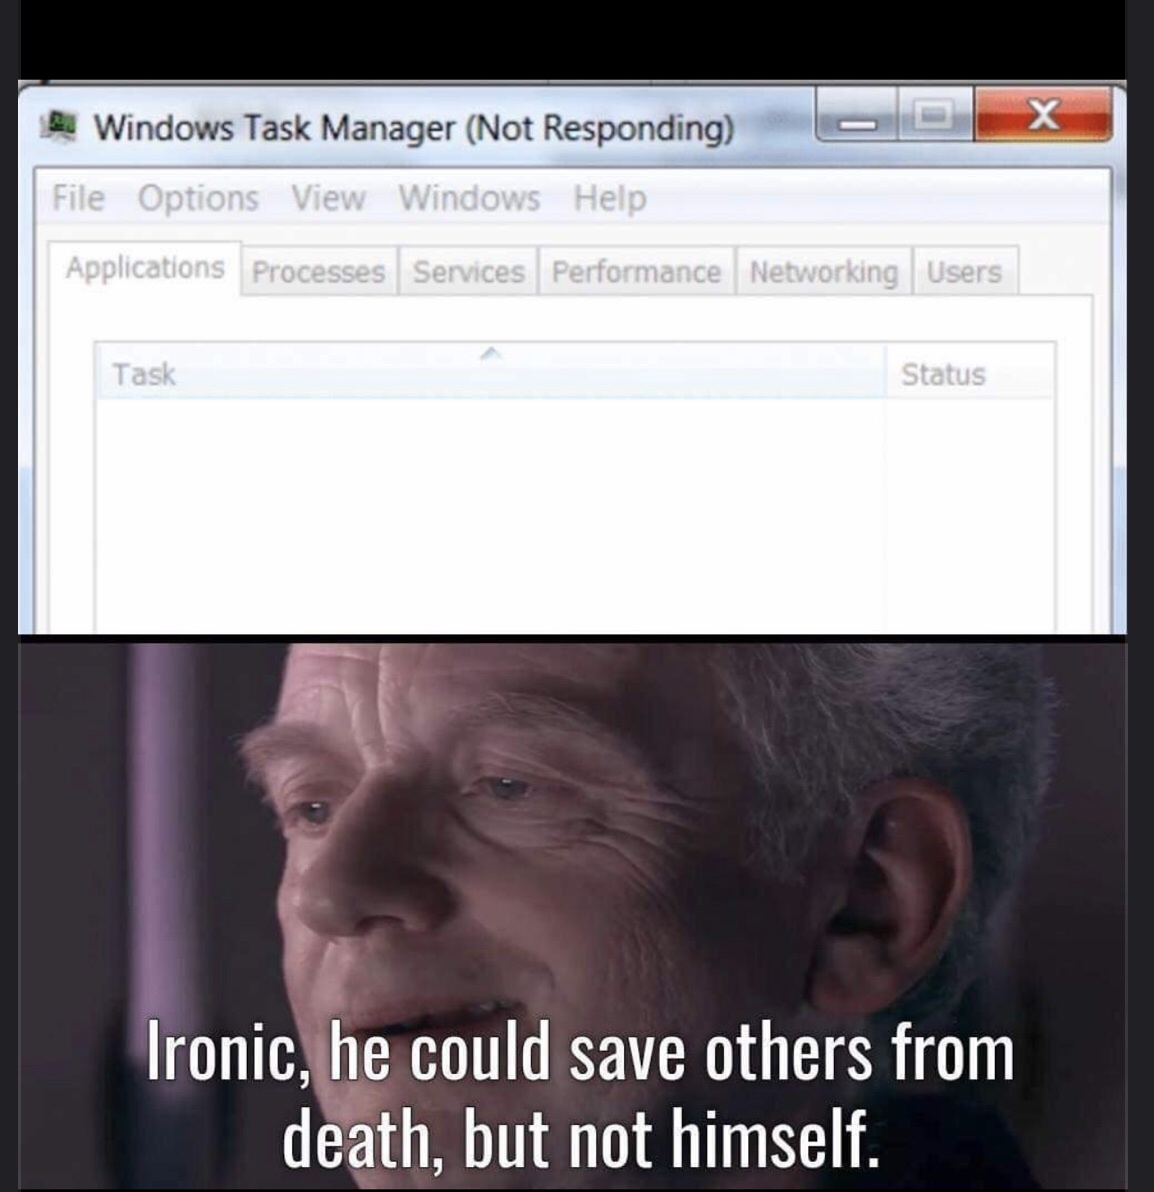 task manager meme - Lu Windows Task Manager Not Responding File Options View Windows Help Applications Processes Services Performance Networking Users Task Status Ironic, he could save others from death, but not himself.